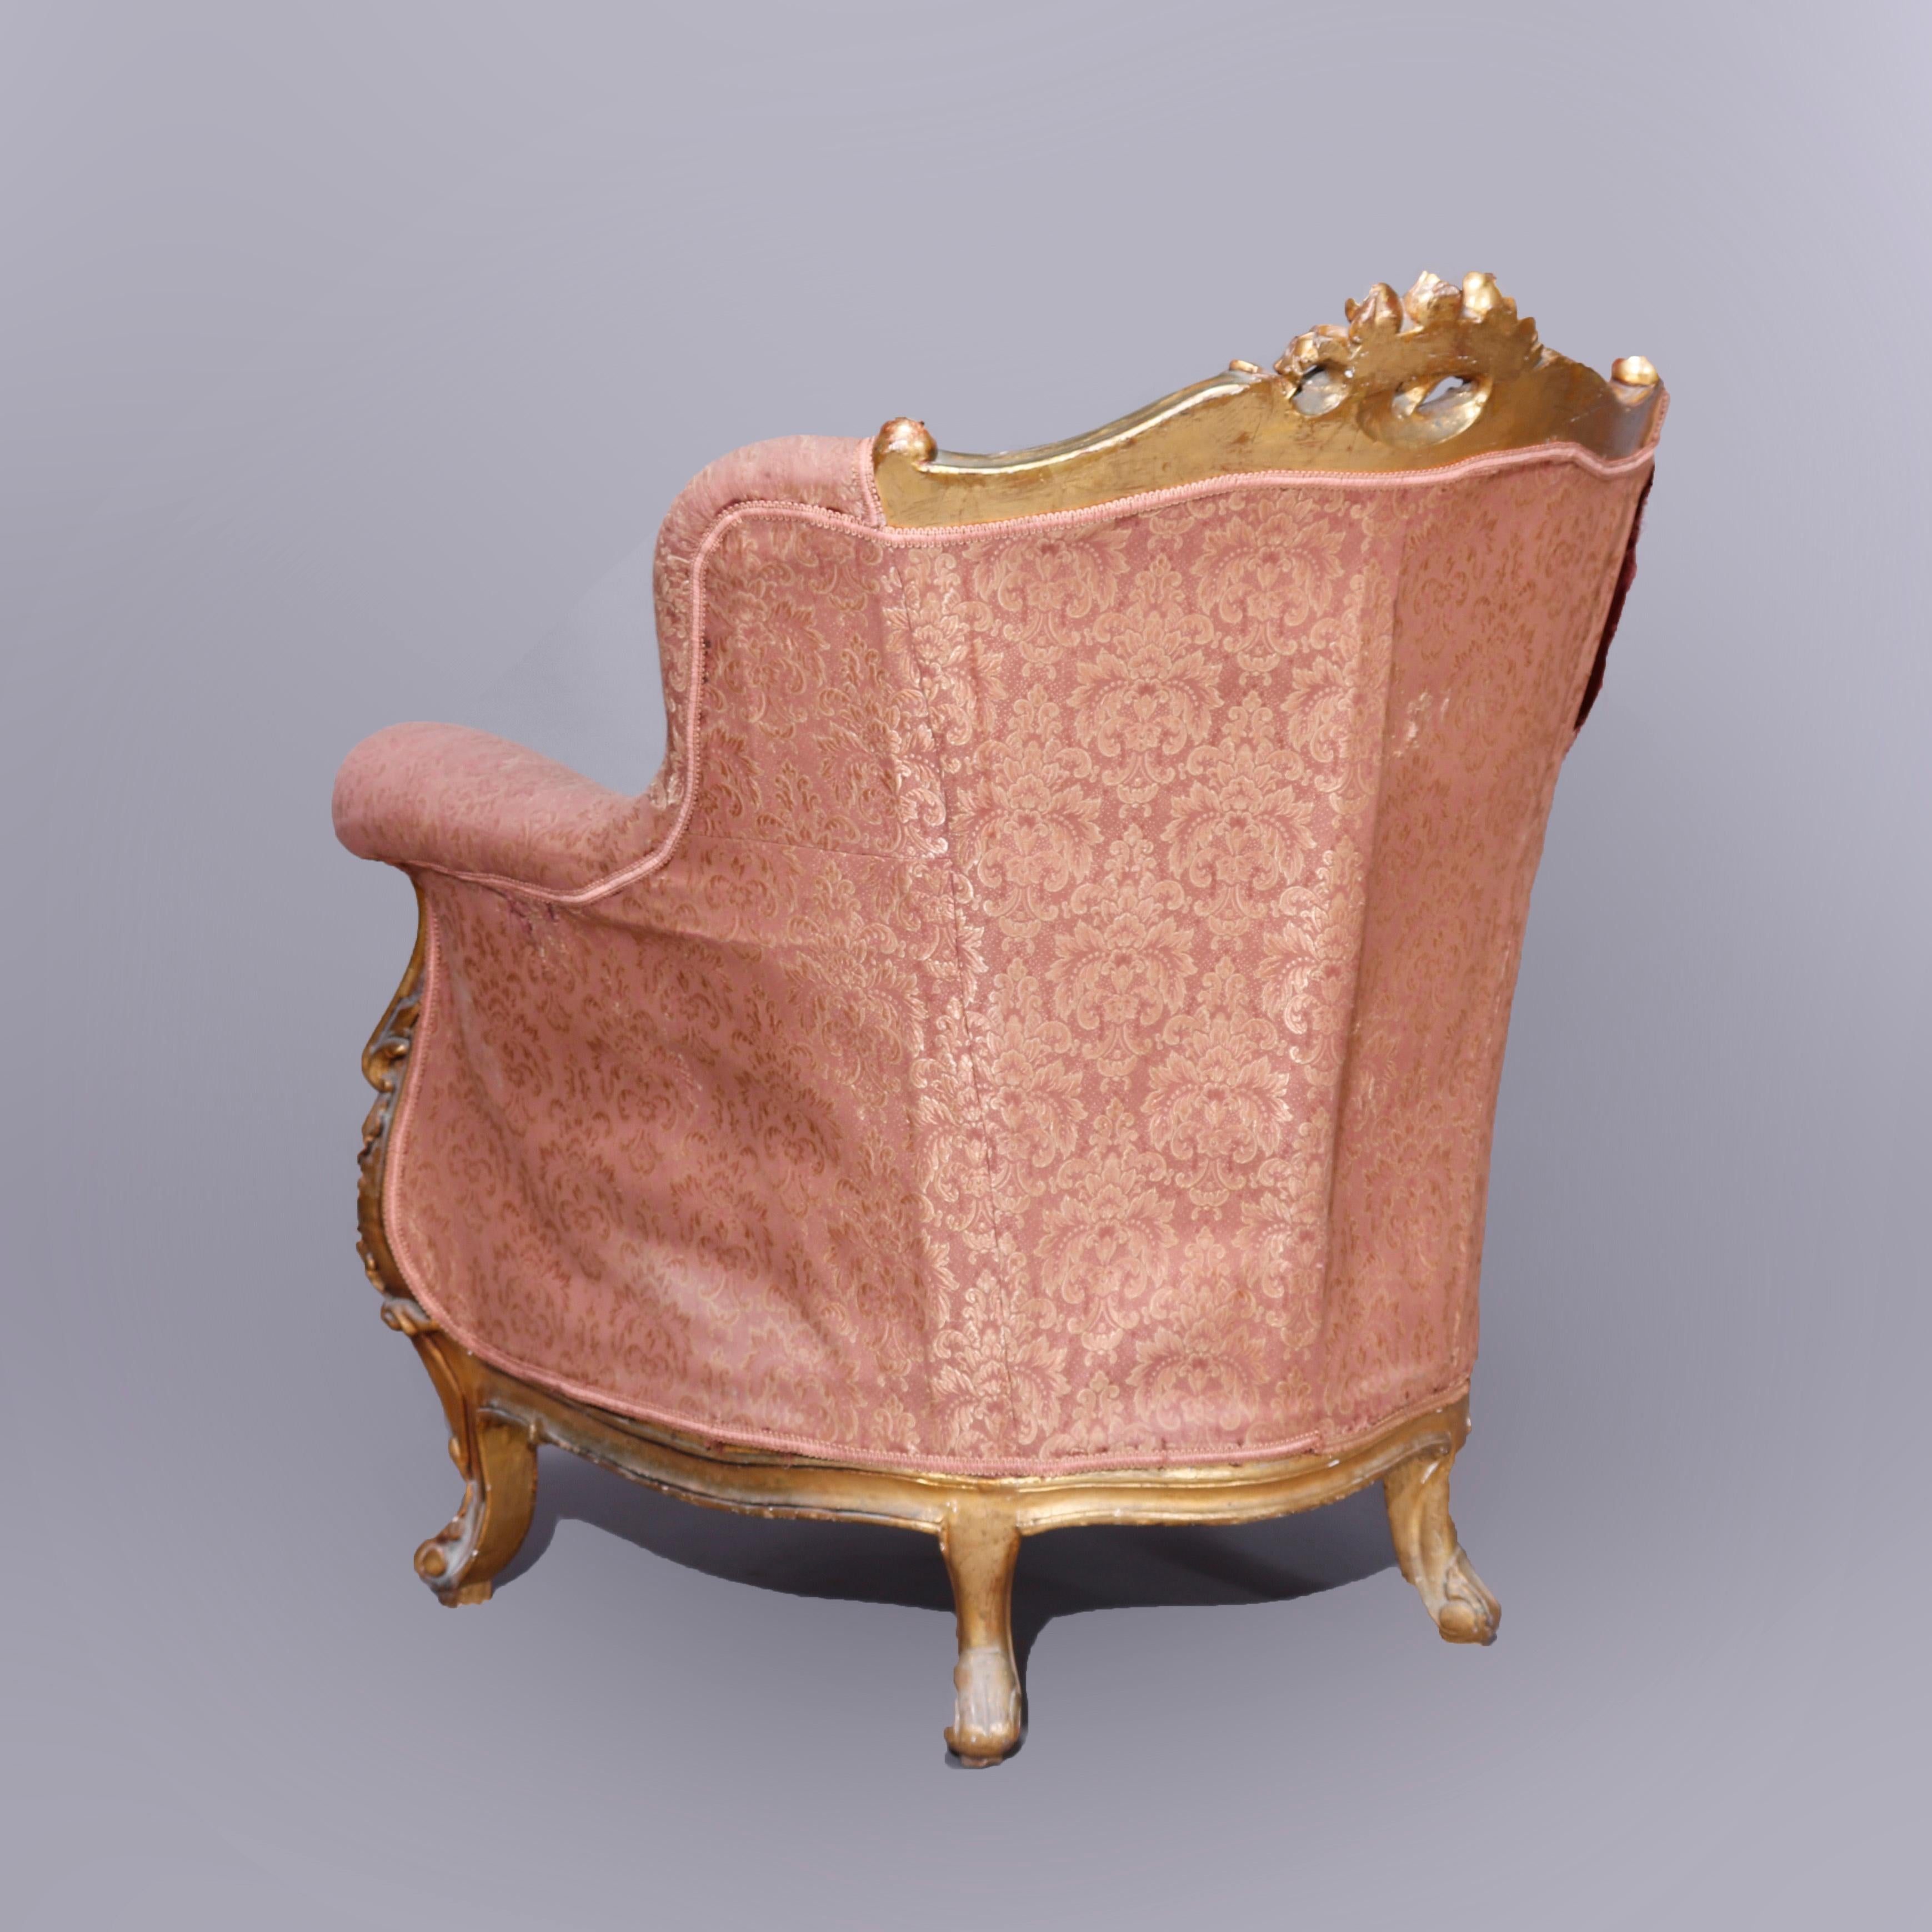 Upholstery Pair Antique French Louis XIV Gilt Wood Upholstered Wing Back Chairs, Circa 1910